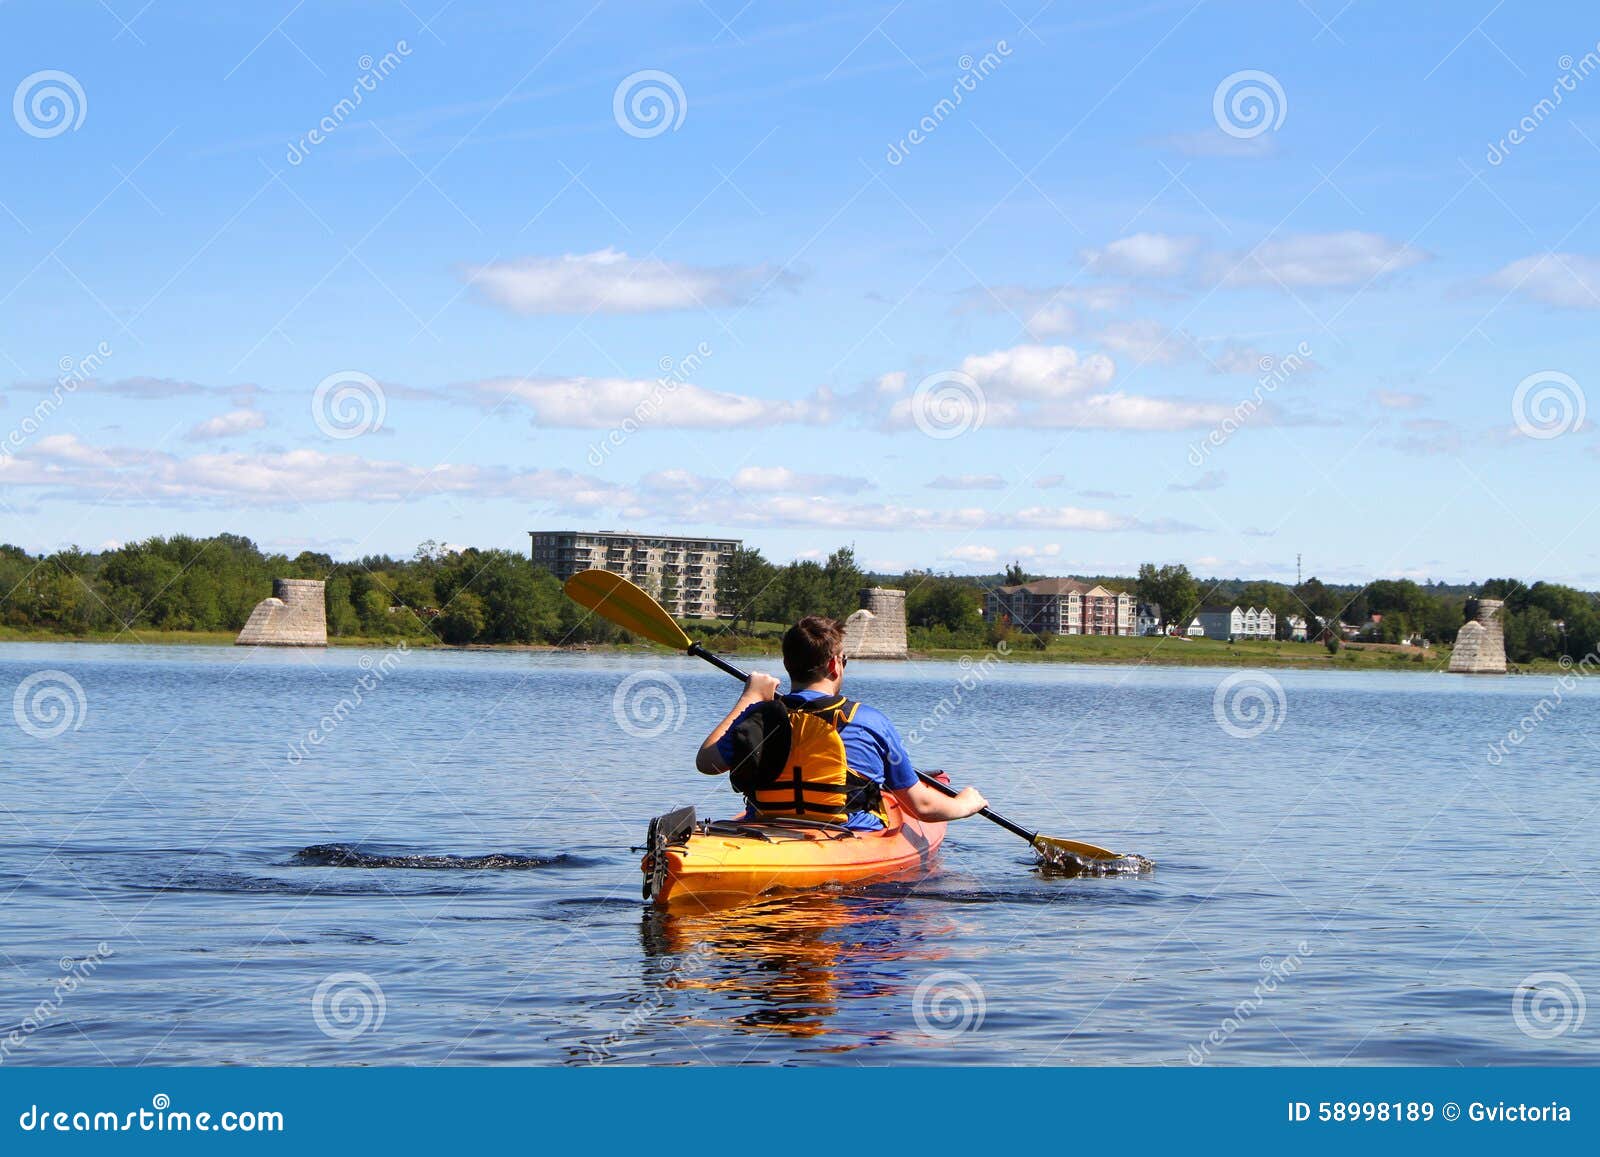 Kayaking On The River In Fredericton Stock Photo - Image 